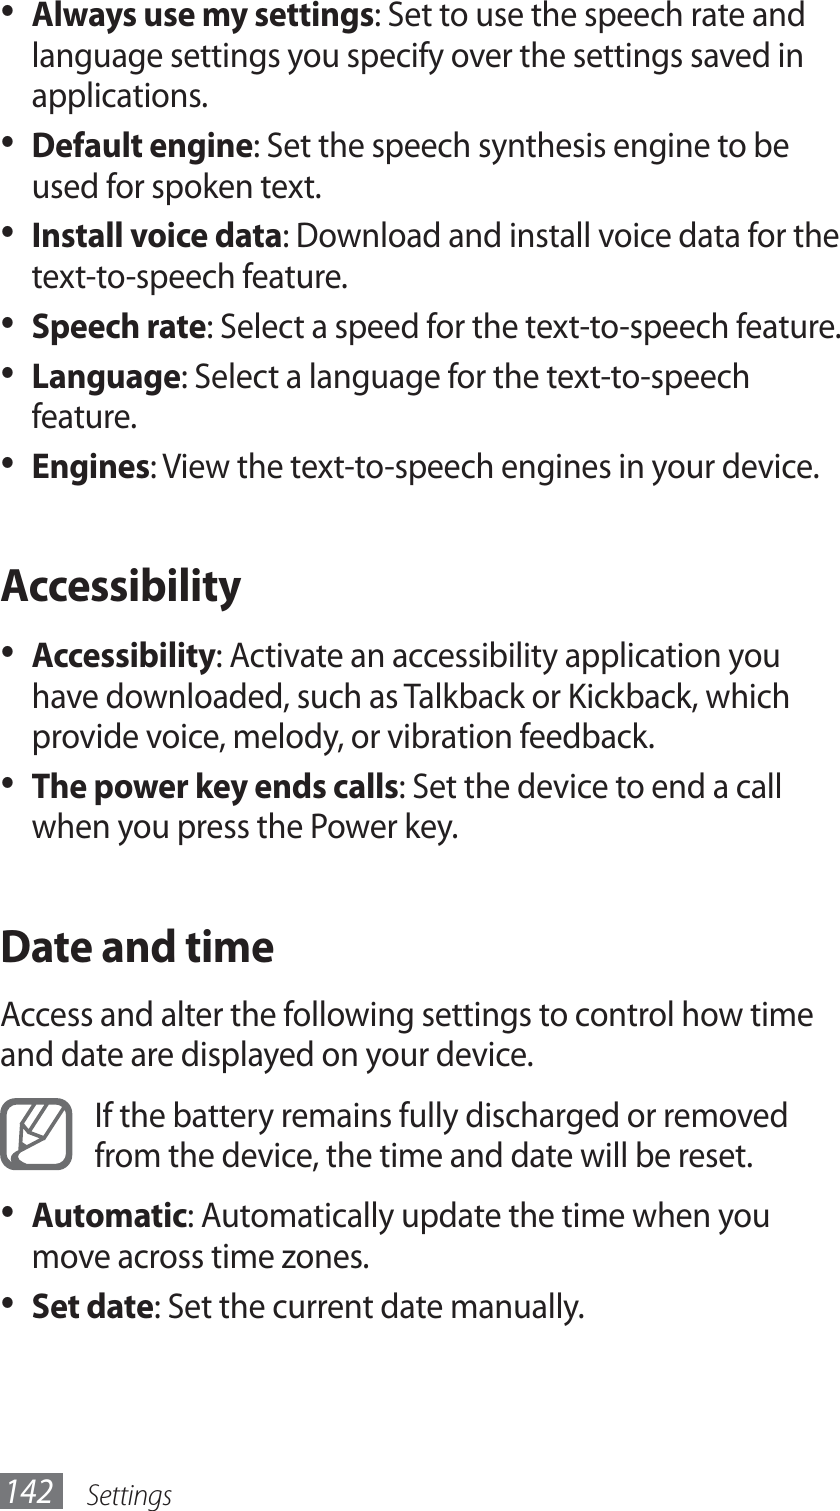 Settings142Always use my settings•  : Set to use the speech rate and language settings you specify over the settings saved in applications.Default engine•  : Set the speech synthesis engine to be used for spoken text.Install voice data•  : Download and install voice data for the text-to-speech feature.Speech rate•  : Select a speed for the text-to-speech feature.Language•  : Select a language for the text-to-speech feature.Engines•  : View the text-to-speech engines in your device.AccessibilityAccessibility•  : Activate an accessibility application you have downloaded, such as Talkback or Kickback, which provide voice, melody, or vibration feedback.The power key ends calls•  : Set the device to end a call when you press the Power key. Date and timeAccess and alter the following settings to control how time and date are displayed on your device.If the battery remains fully discharged or removed from the device, the time and date will be reset.Automatic•  : Automatically update the time when you move across time zones.Set date•  : Set the current date manually.